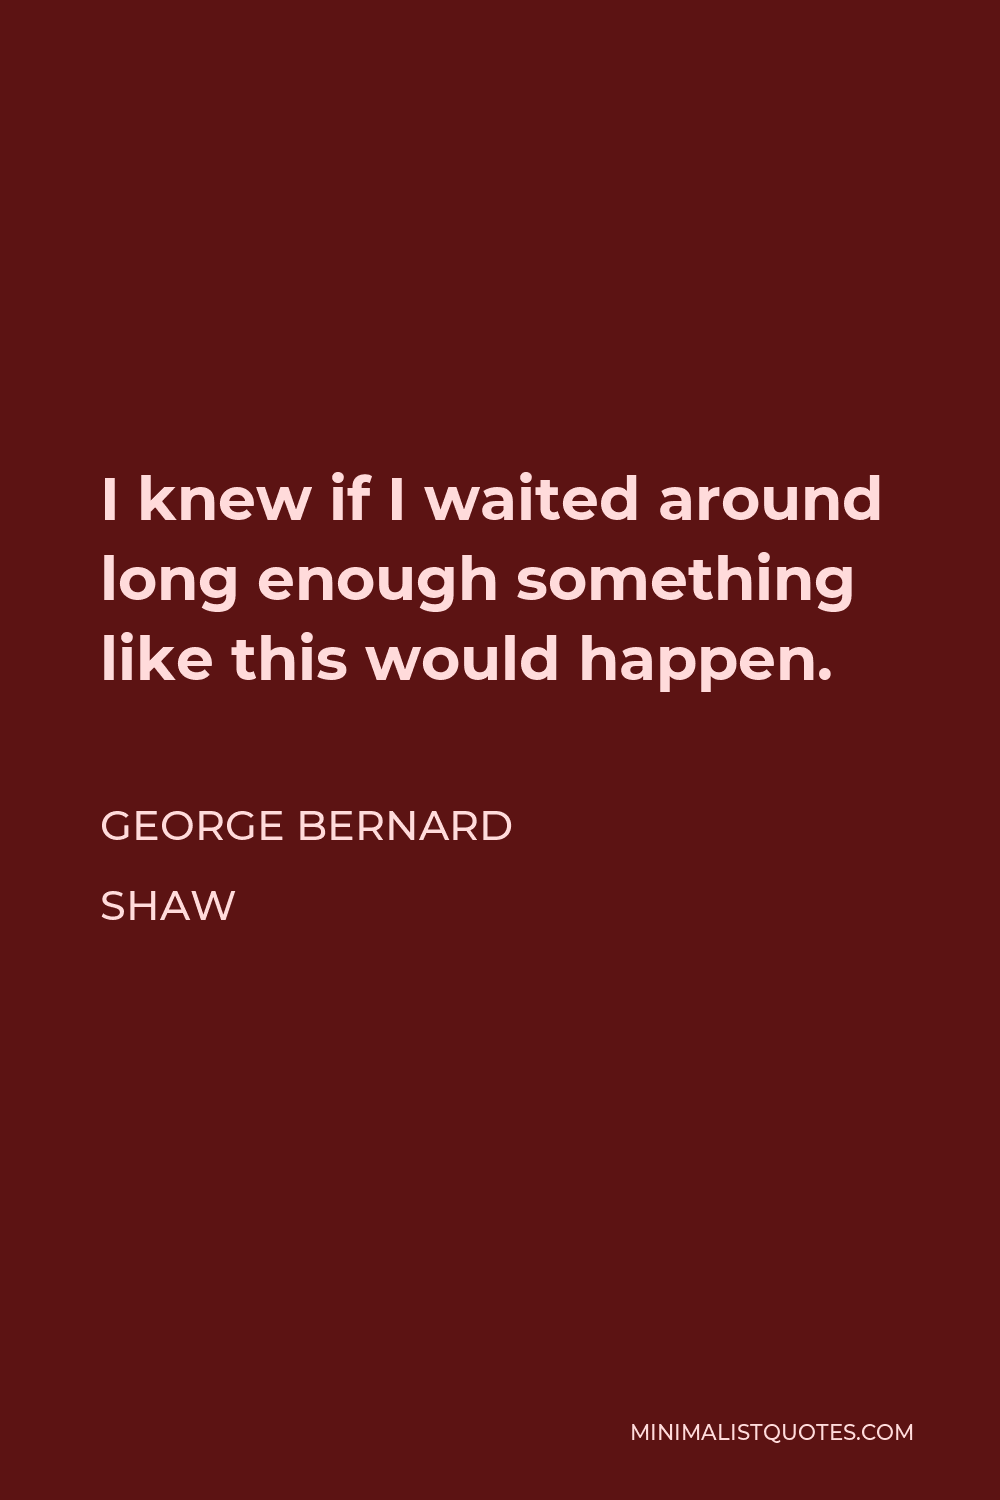 George Bernard Shaw Quote - I knew if I waited around long enough something like this would happen.